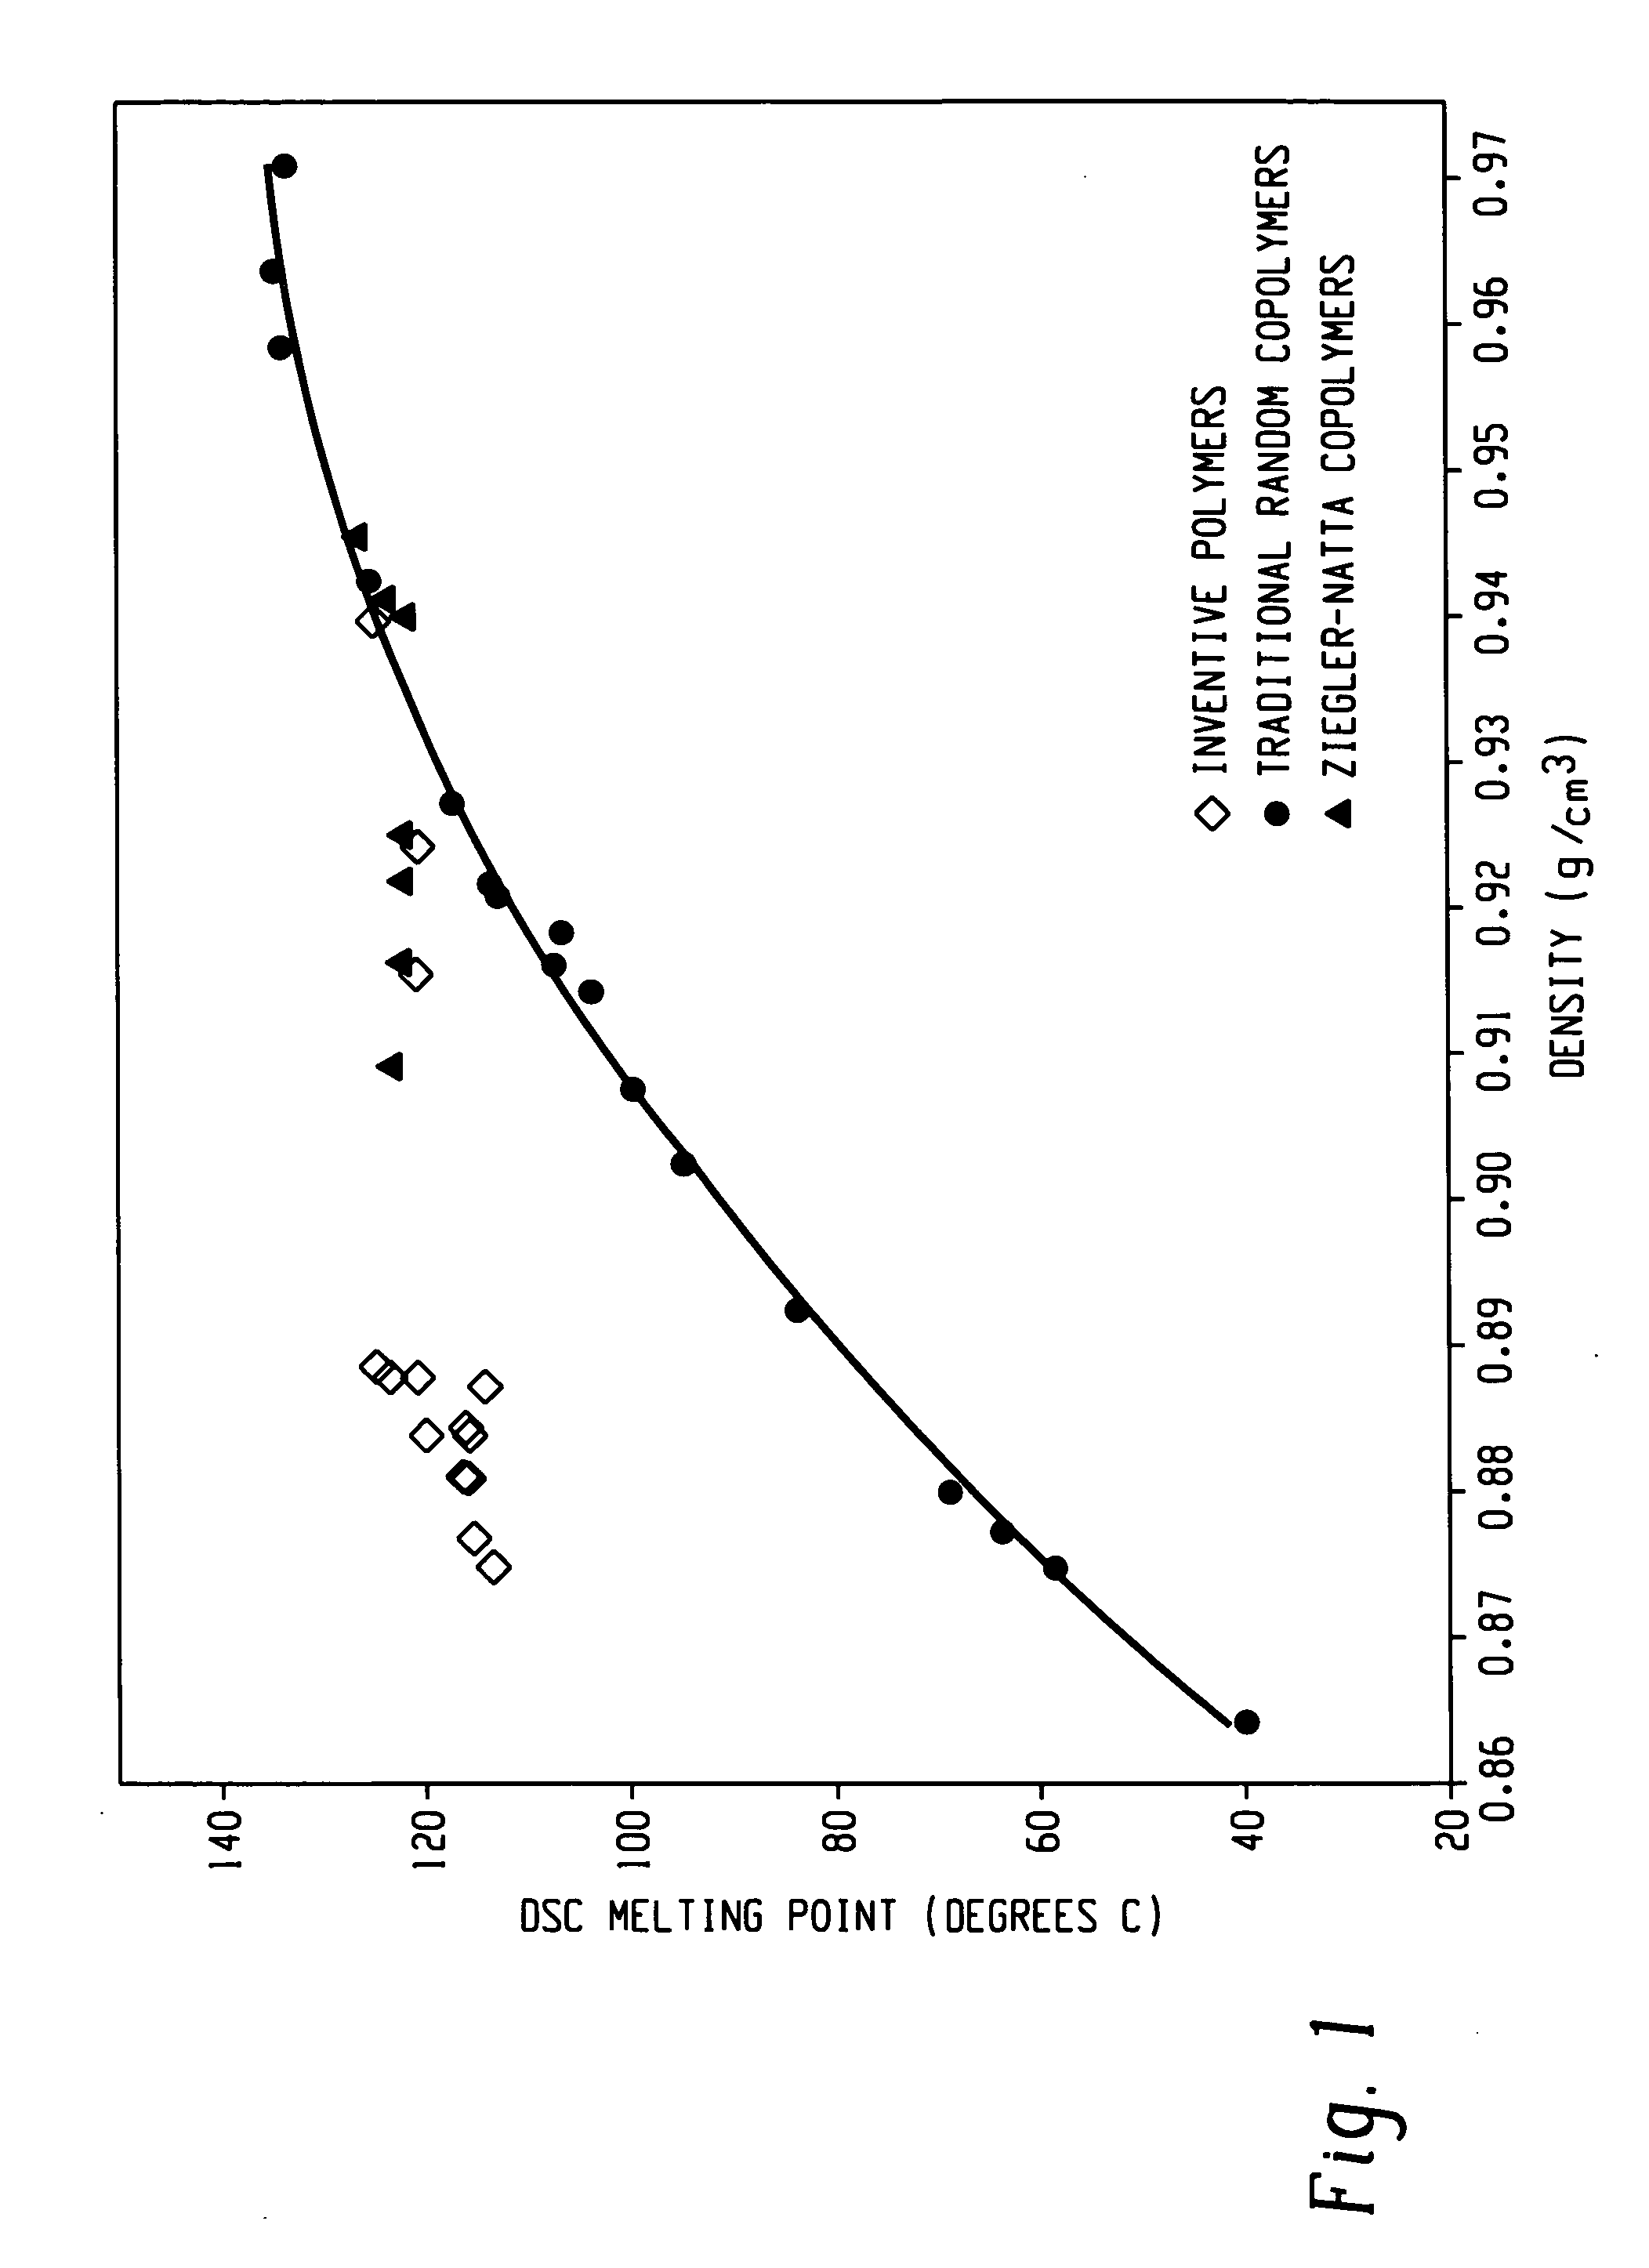 Viscosity index improver for lubricant compositions